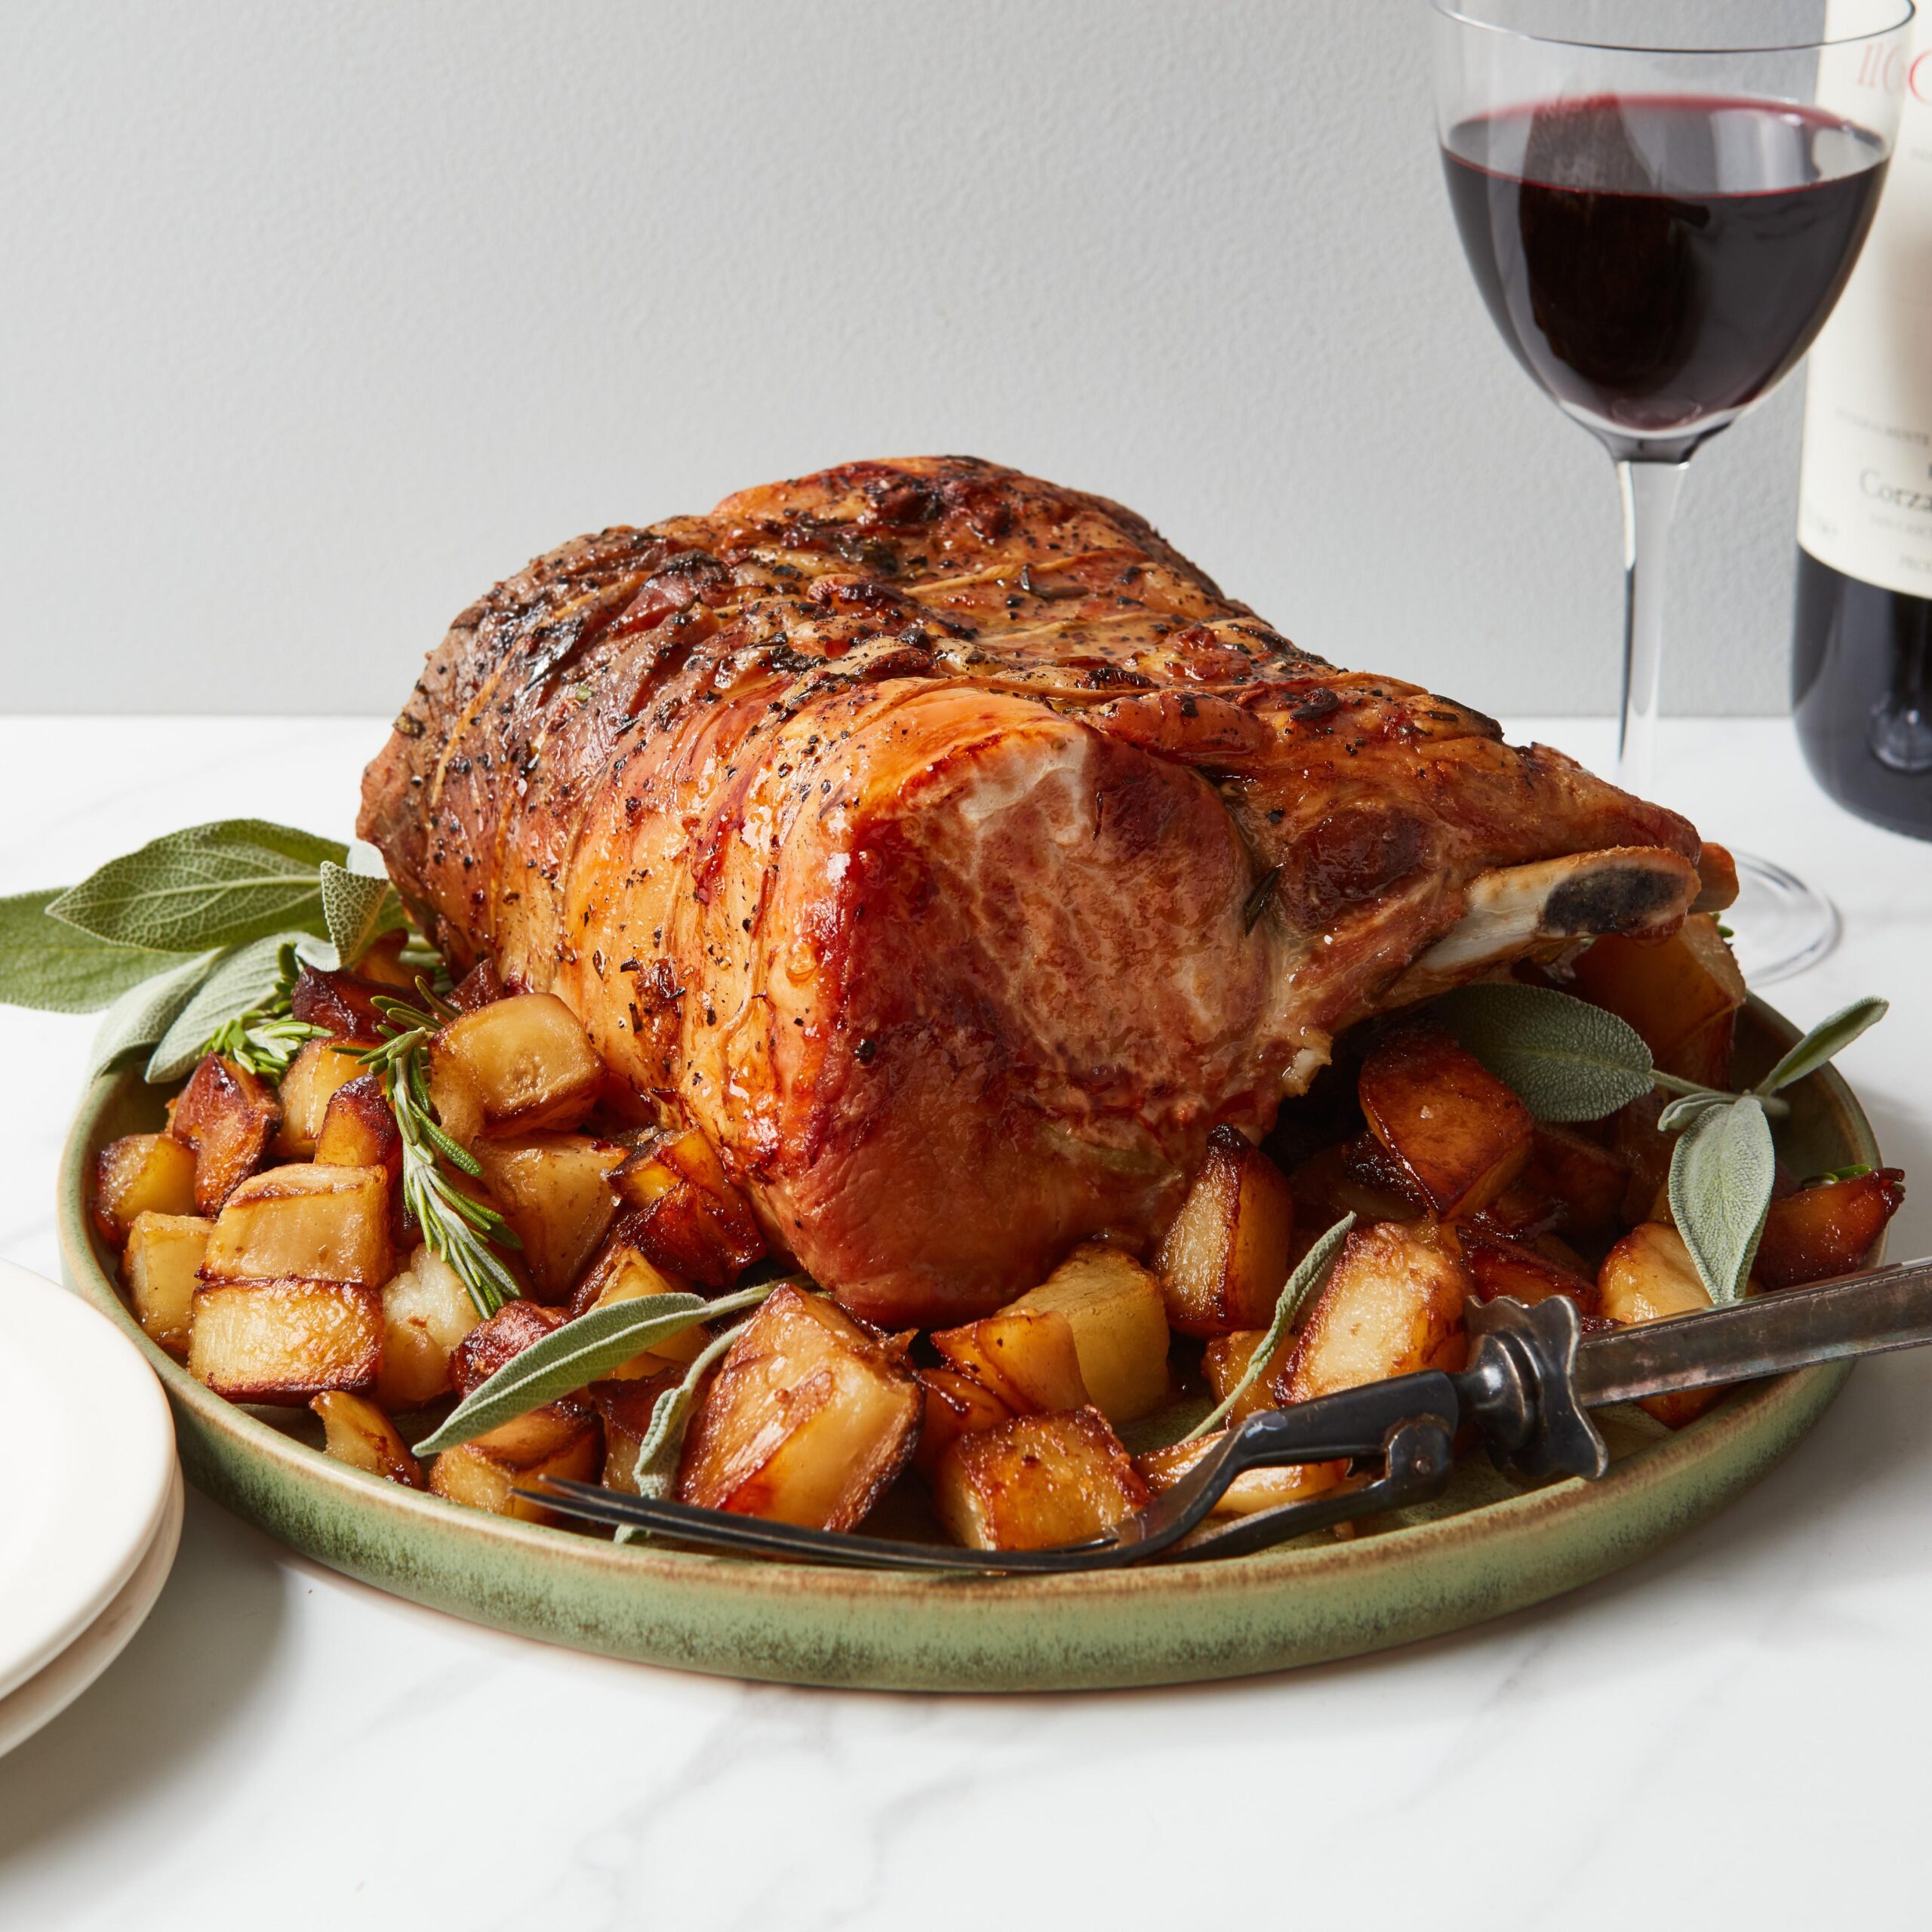  Red wine adds a deep, rich layer of flavor to the dish- it's like a decadent finishing touch.